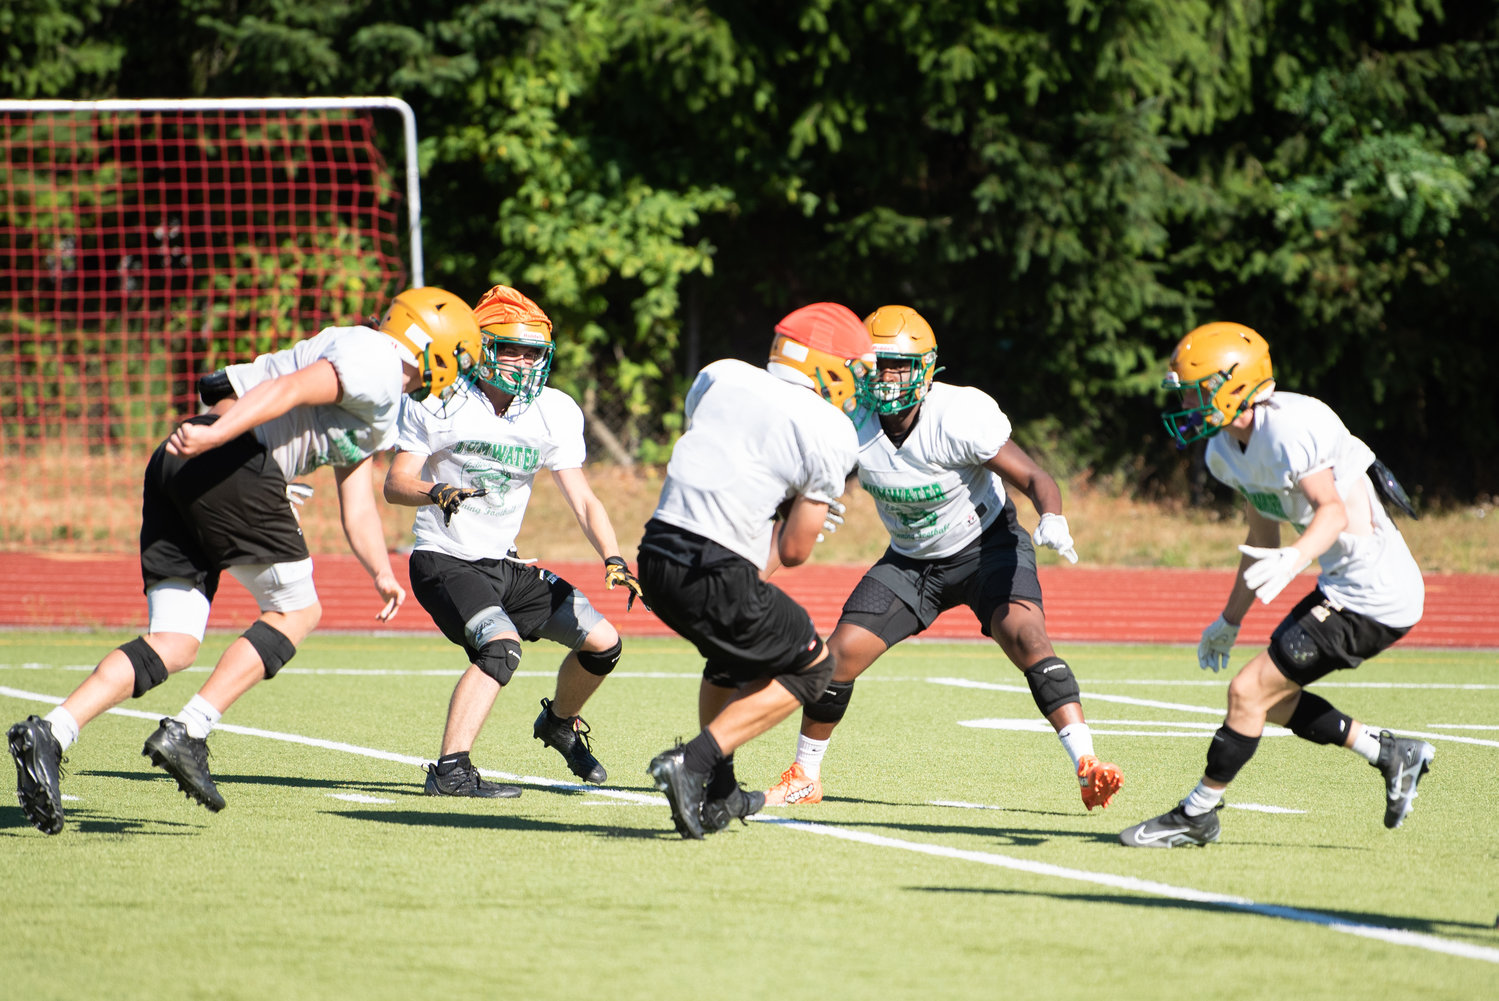 Thunderbirds swarm to the ballcarrier during their practice on Aug. 22 at Sid Otton Field.